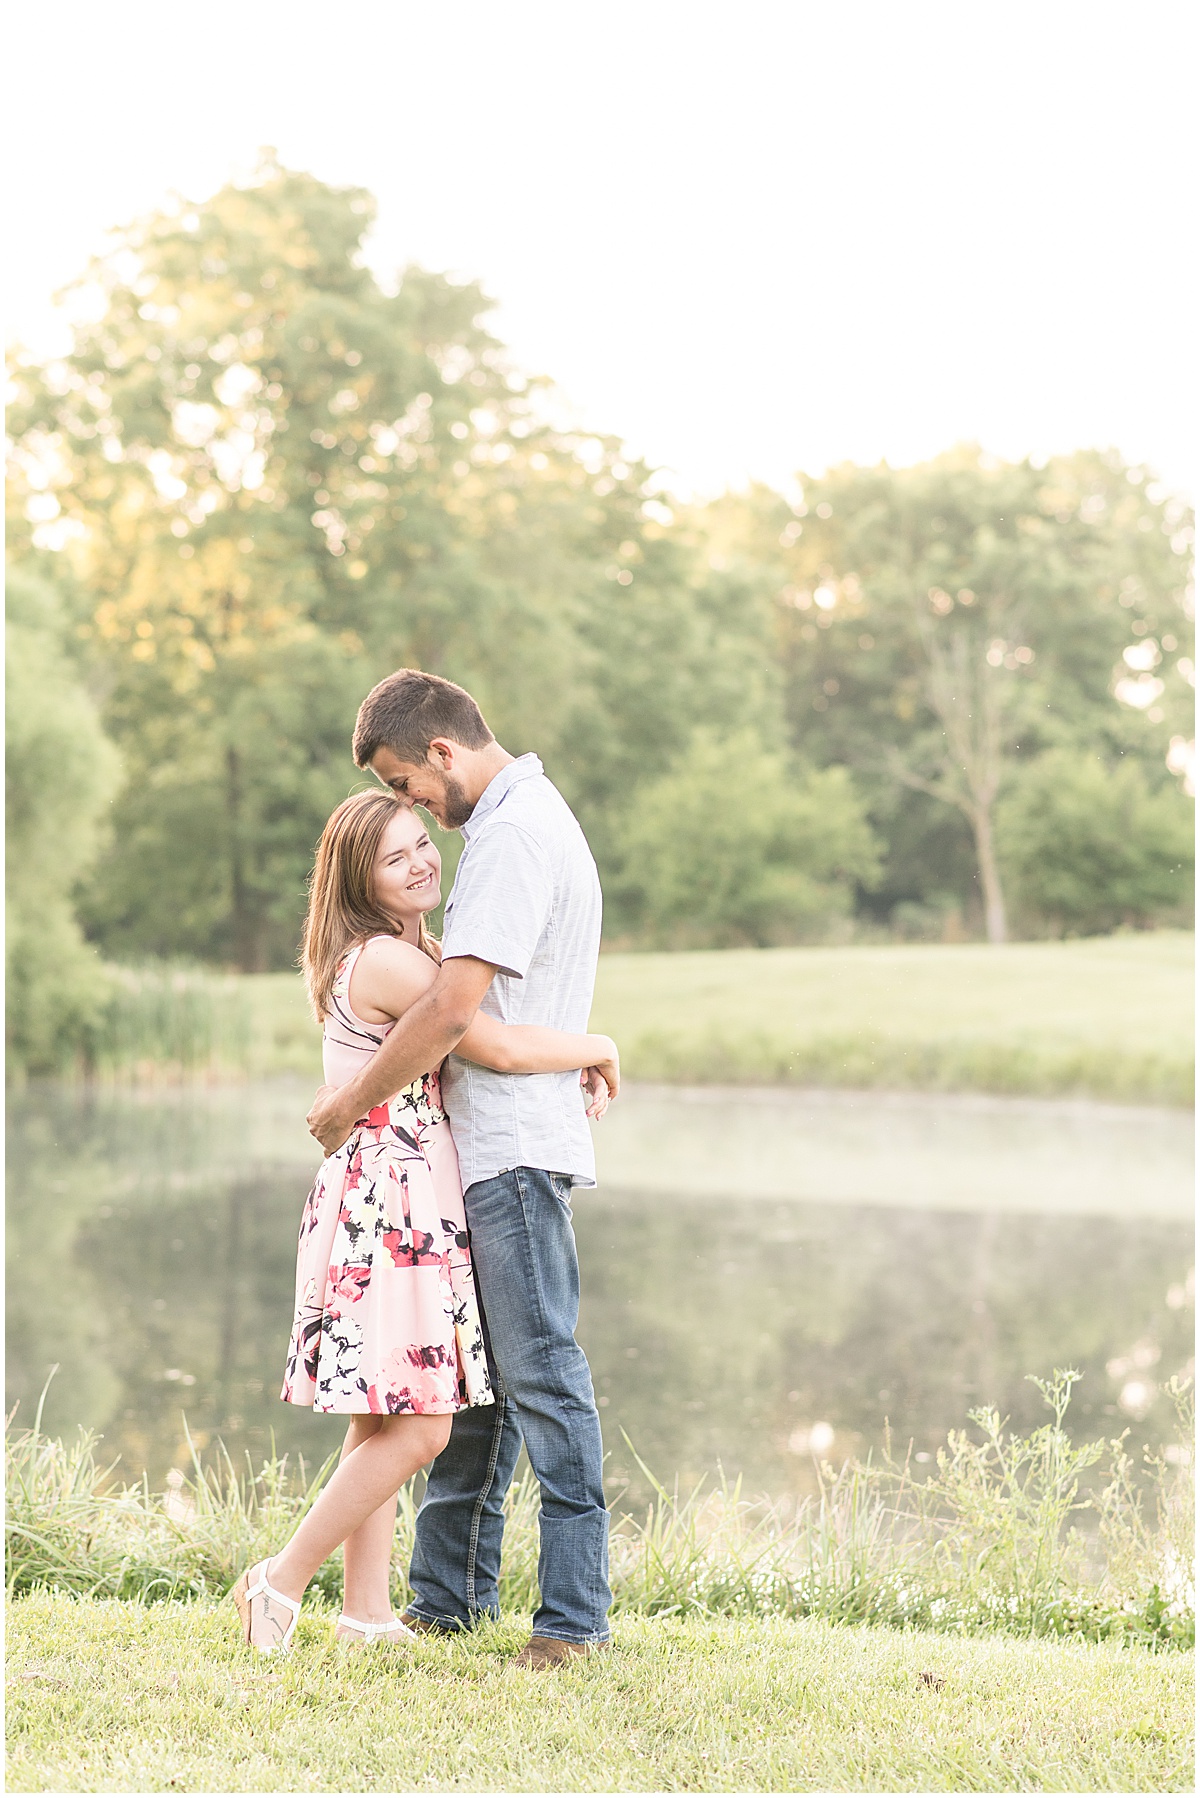 Engagement photos in Monticello, Indiana